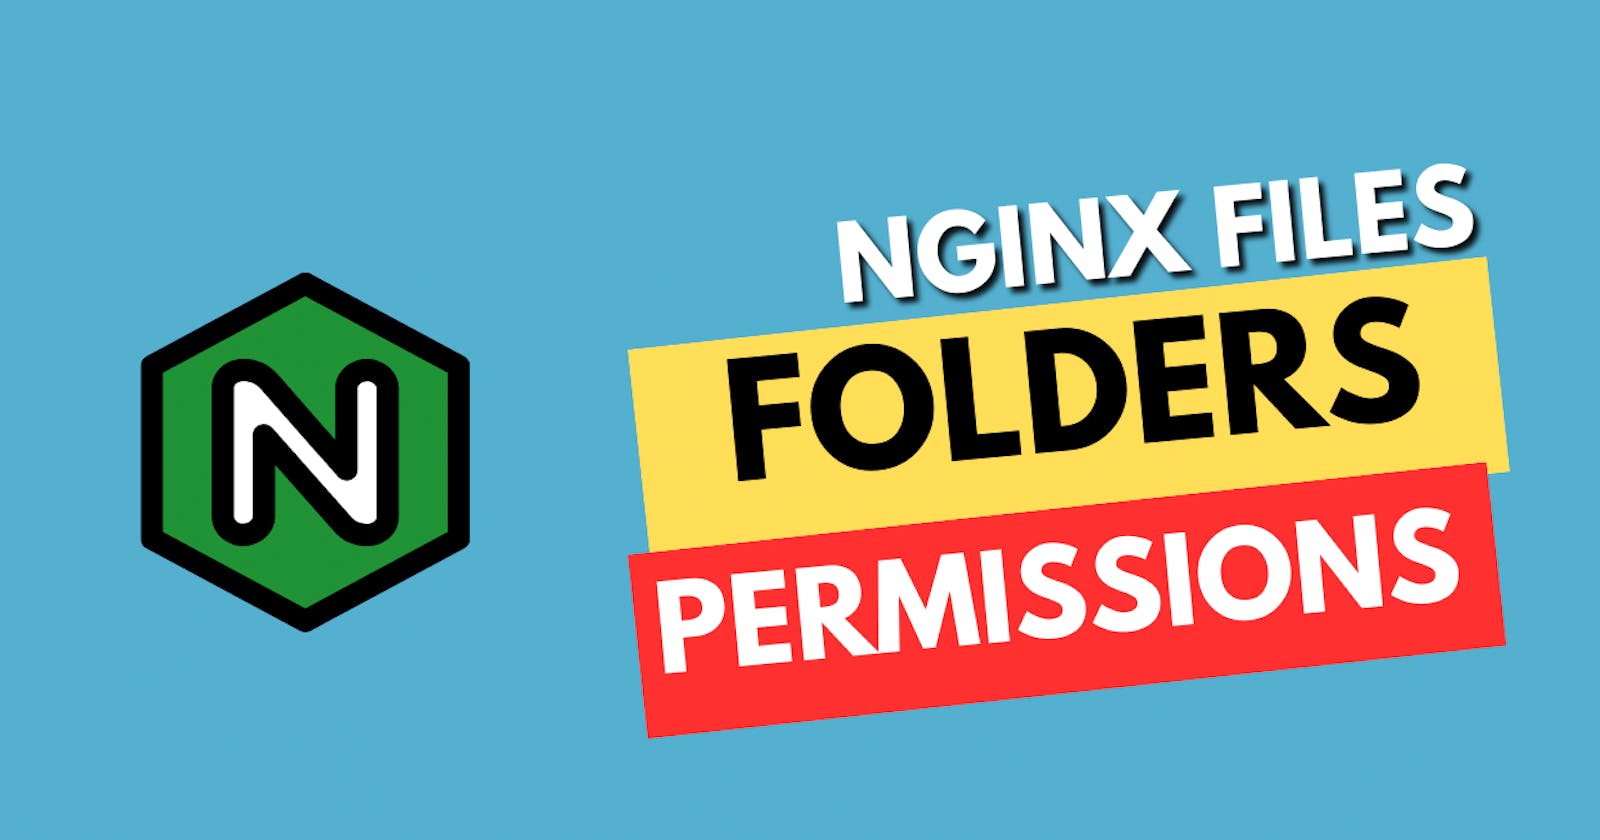 Nginx files and folders permissions 755 and